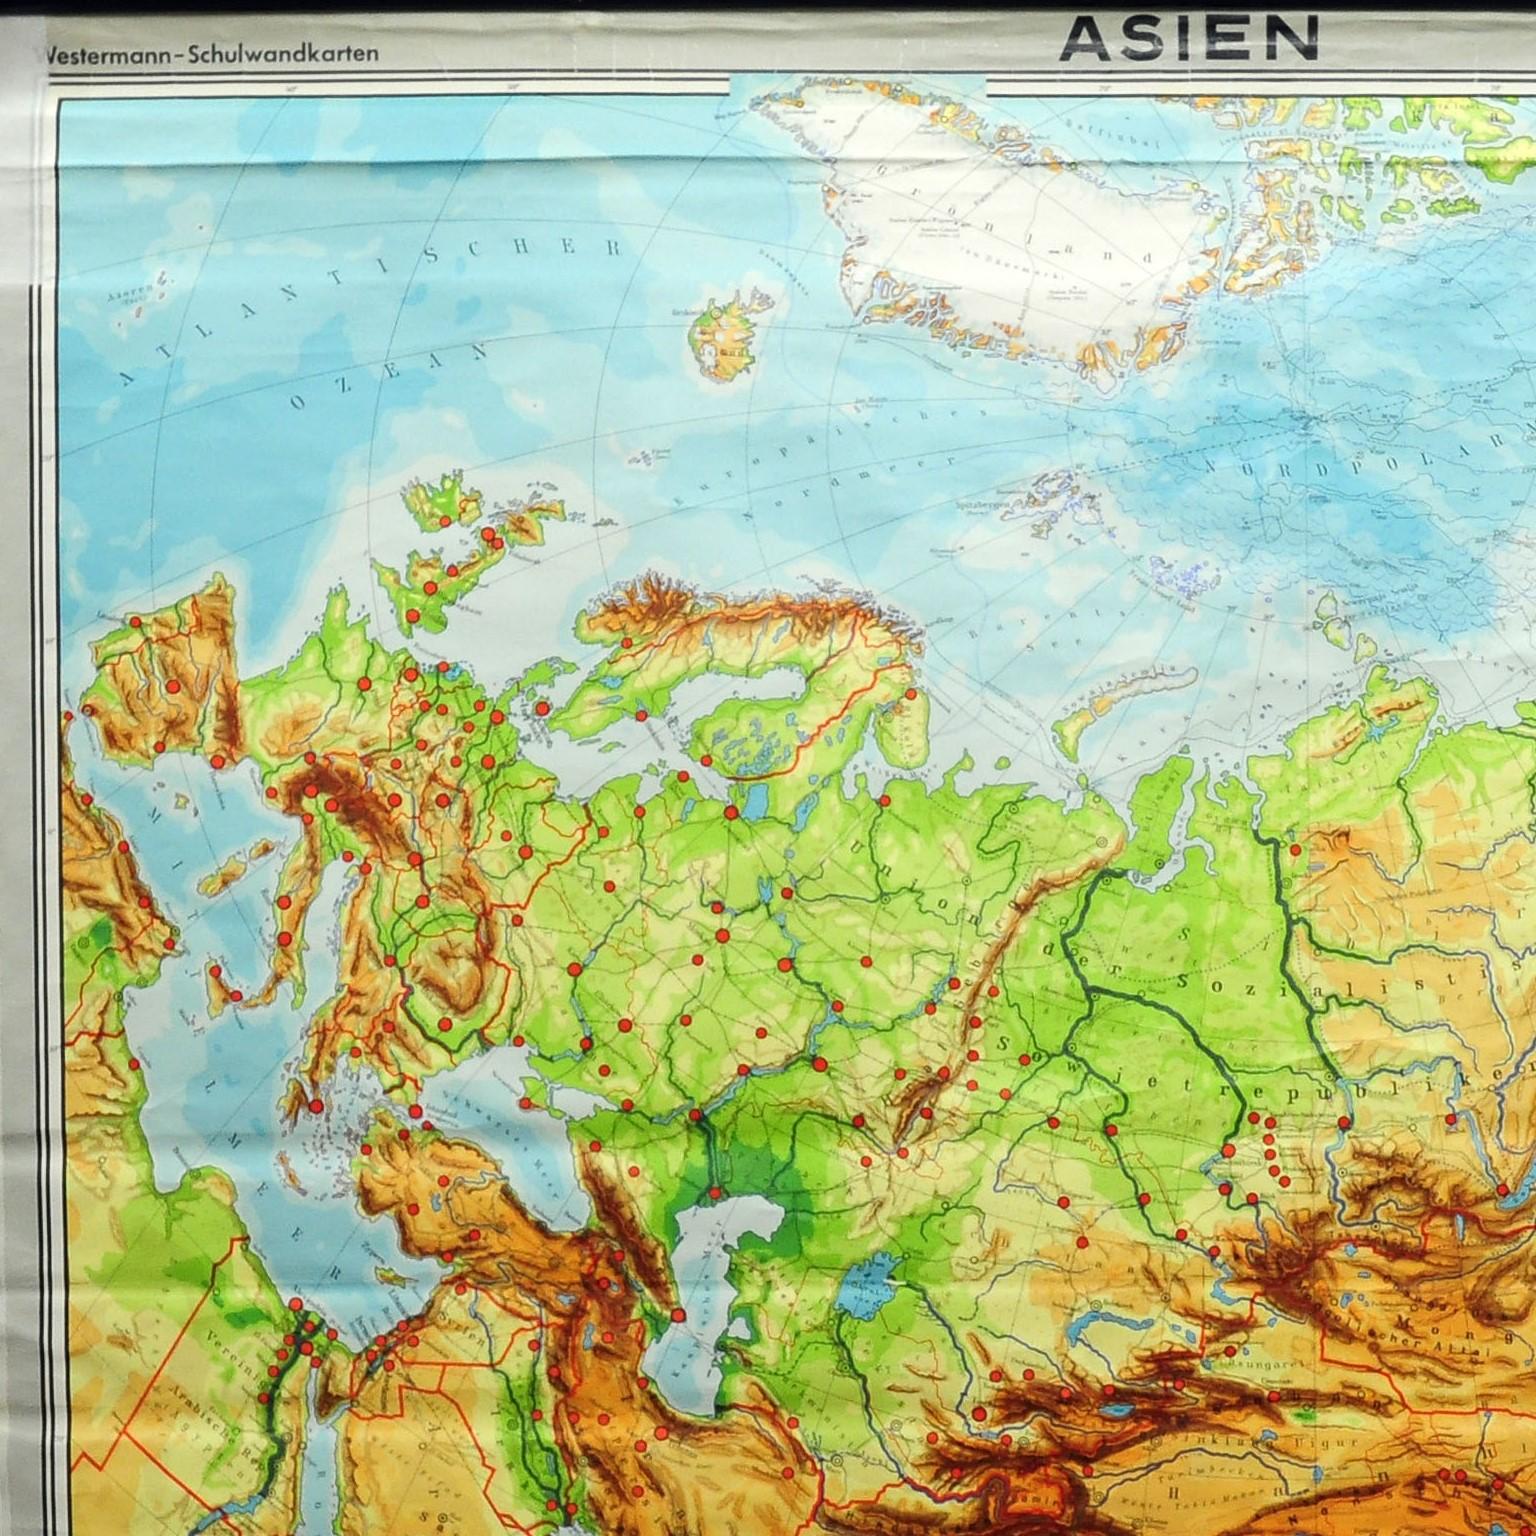 The impressive rollable wall map shows the continent of Asia (among others China, Japan, India and Russia), published by Westermann. Colorful print on paper reinforced with canvas.
Measurements:
Width 205 cm (80.71 inch)
Height 217 cm (85.43